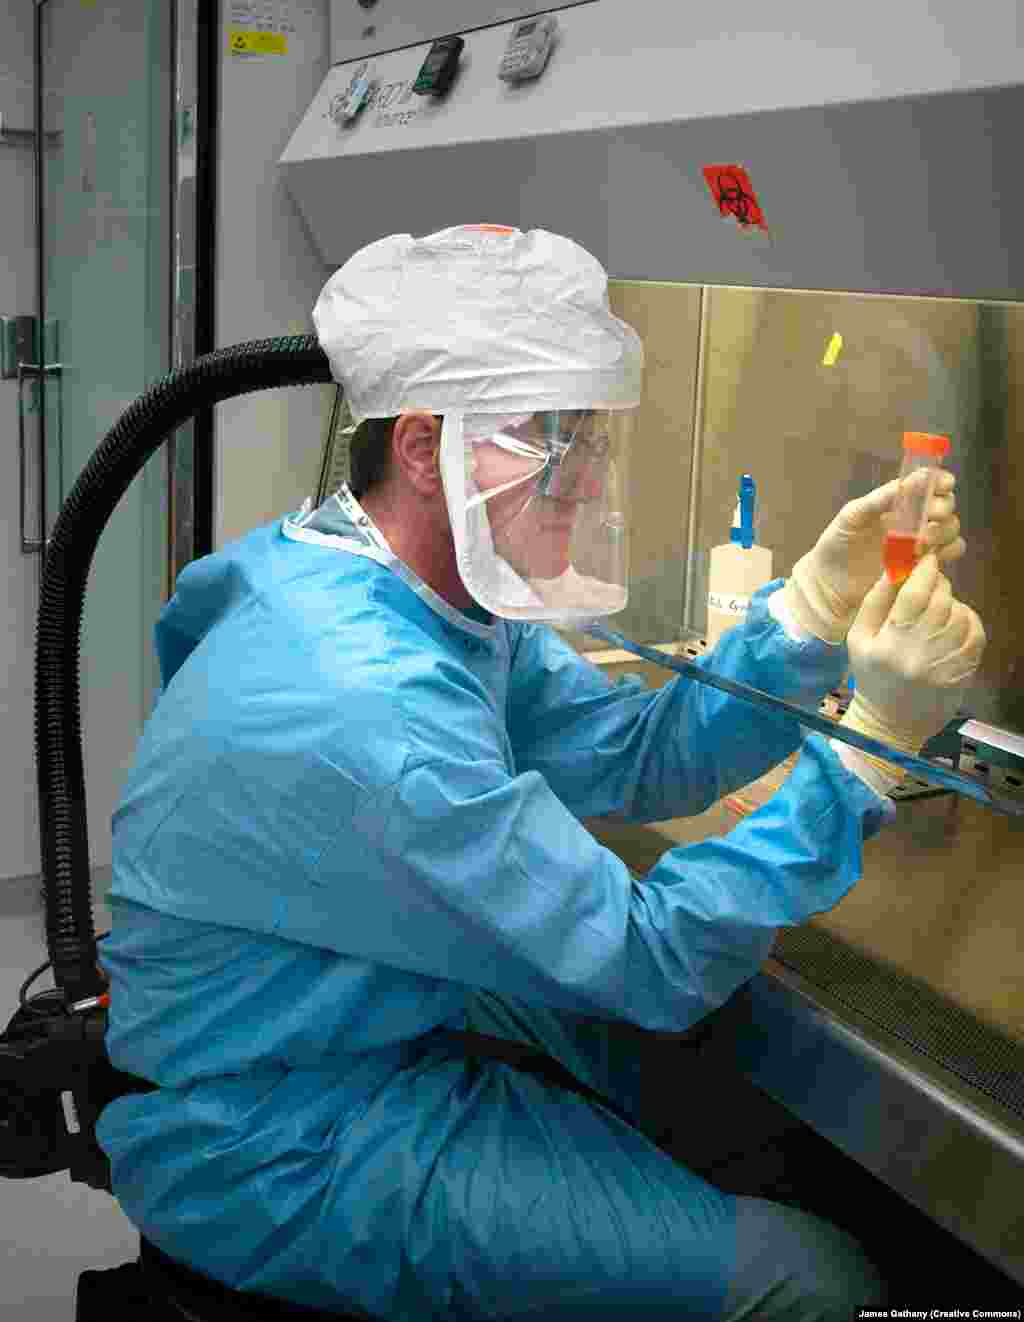 Microbiologist Terrence Tumpey studies a sample of the 1918 flu virus in 2005. The strain was reconstructed after scientists extracted lung tissue from victims of the pandemic who were buried outside a remote village in Alaska. &nbsp; Before the outbreak of the coronavirus, which originated in China in late 2019, Tumpey said: &quot;I think we also really have to be concerned about some of the bird-flu viruses that we see in Asia that are jumping from birds to humans and causing severe disease. If one of those viruses somehow figured out a way to spread efficiently from human to human, then we would have another pandemic on our hands.&quot;